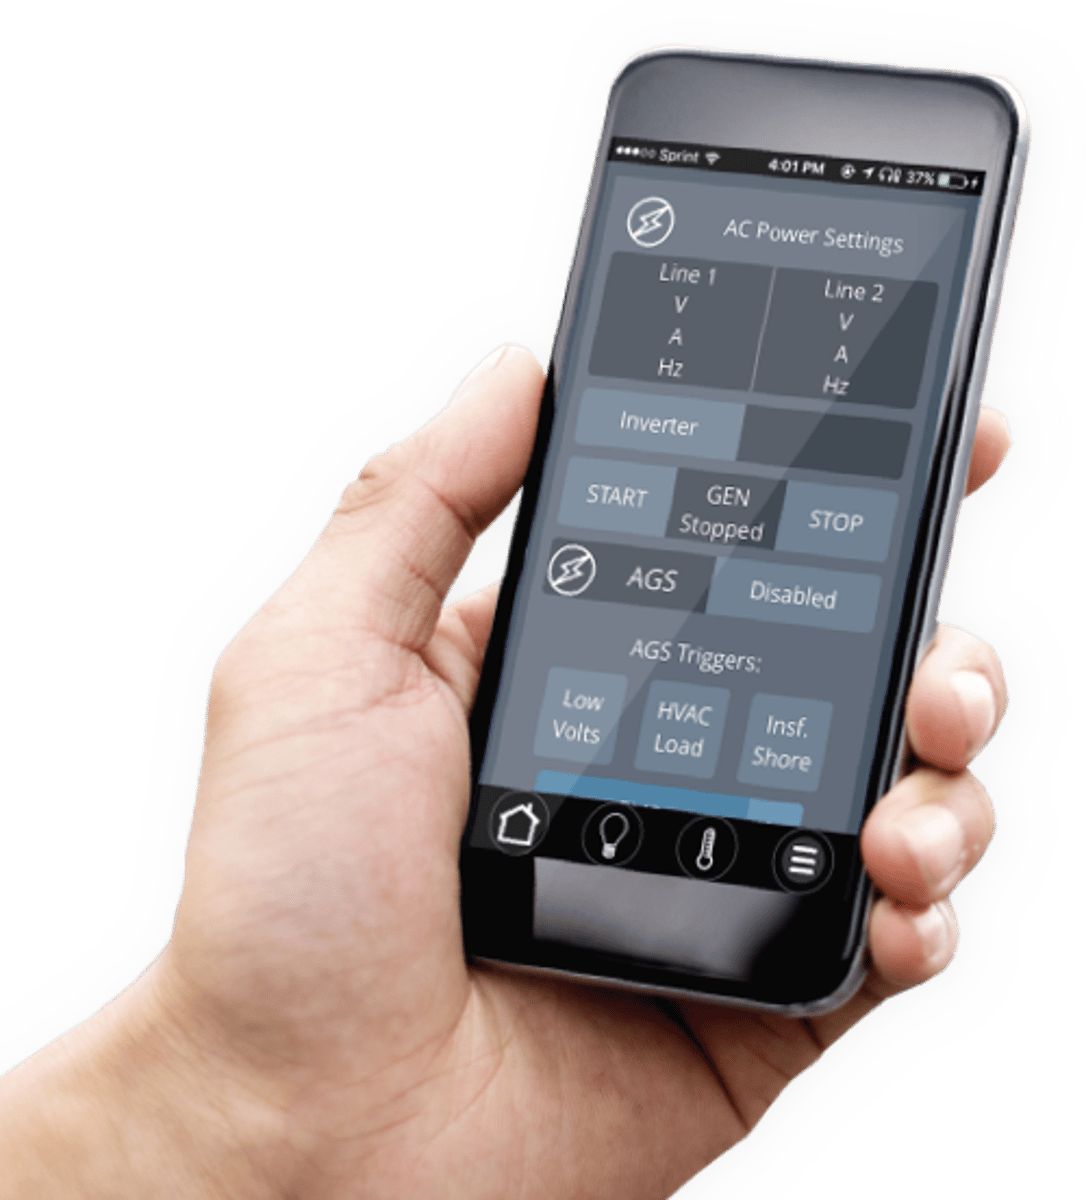 firefly touch screen phones prices